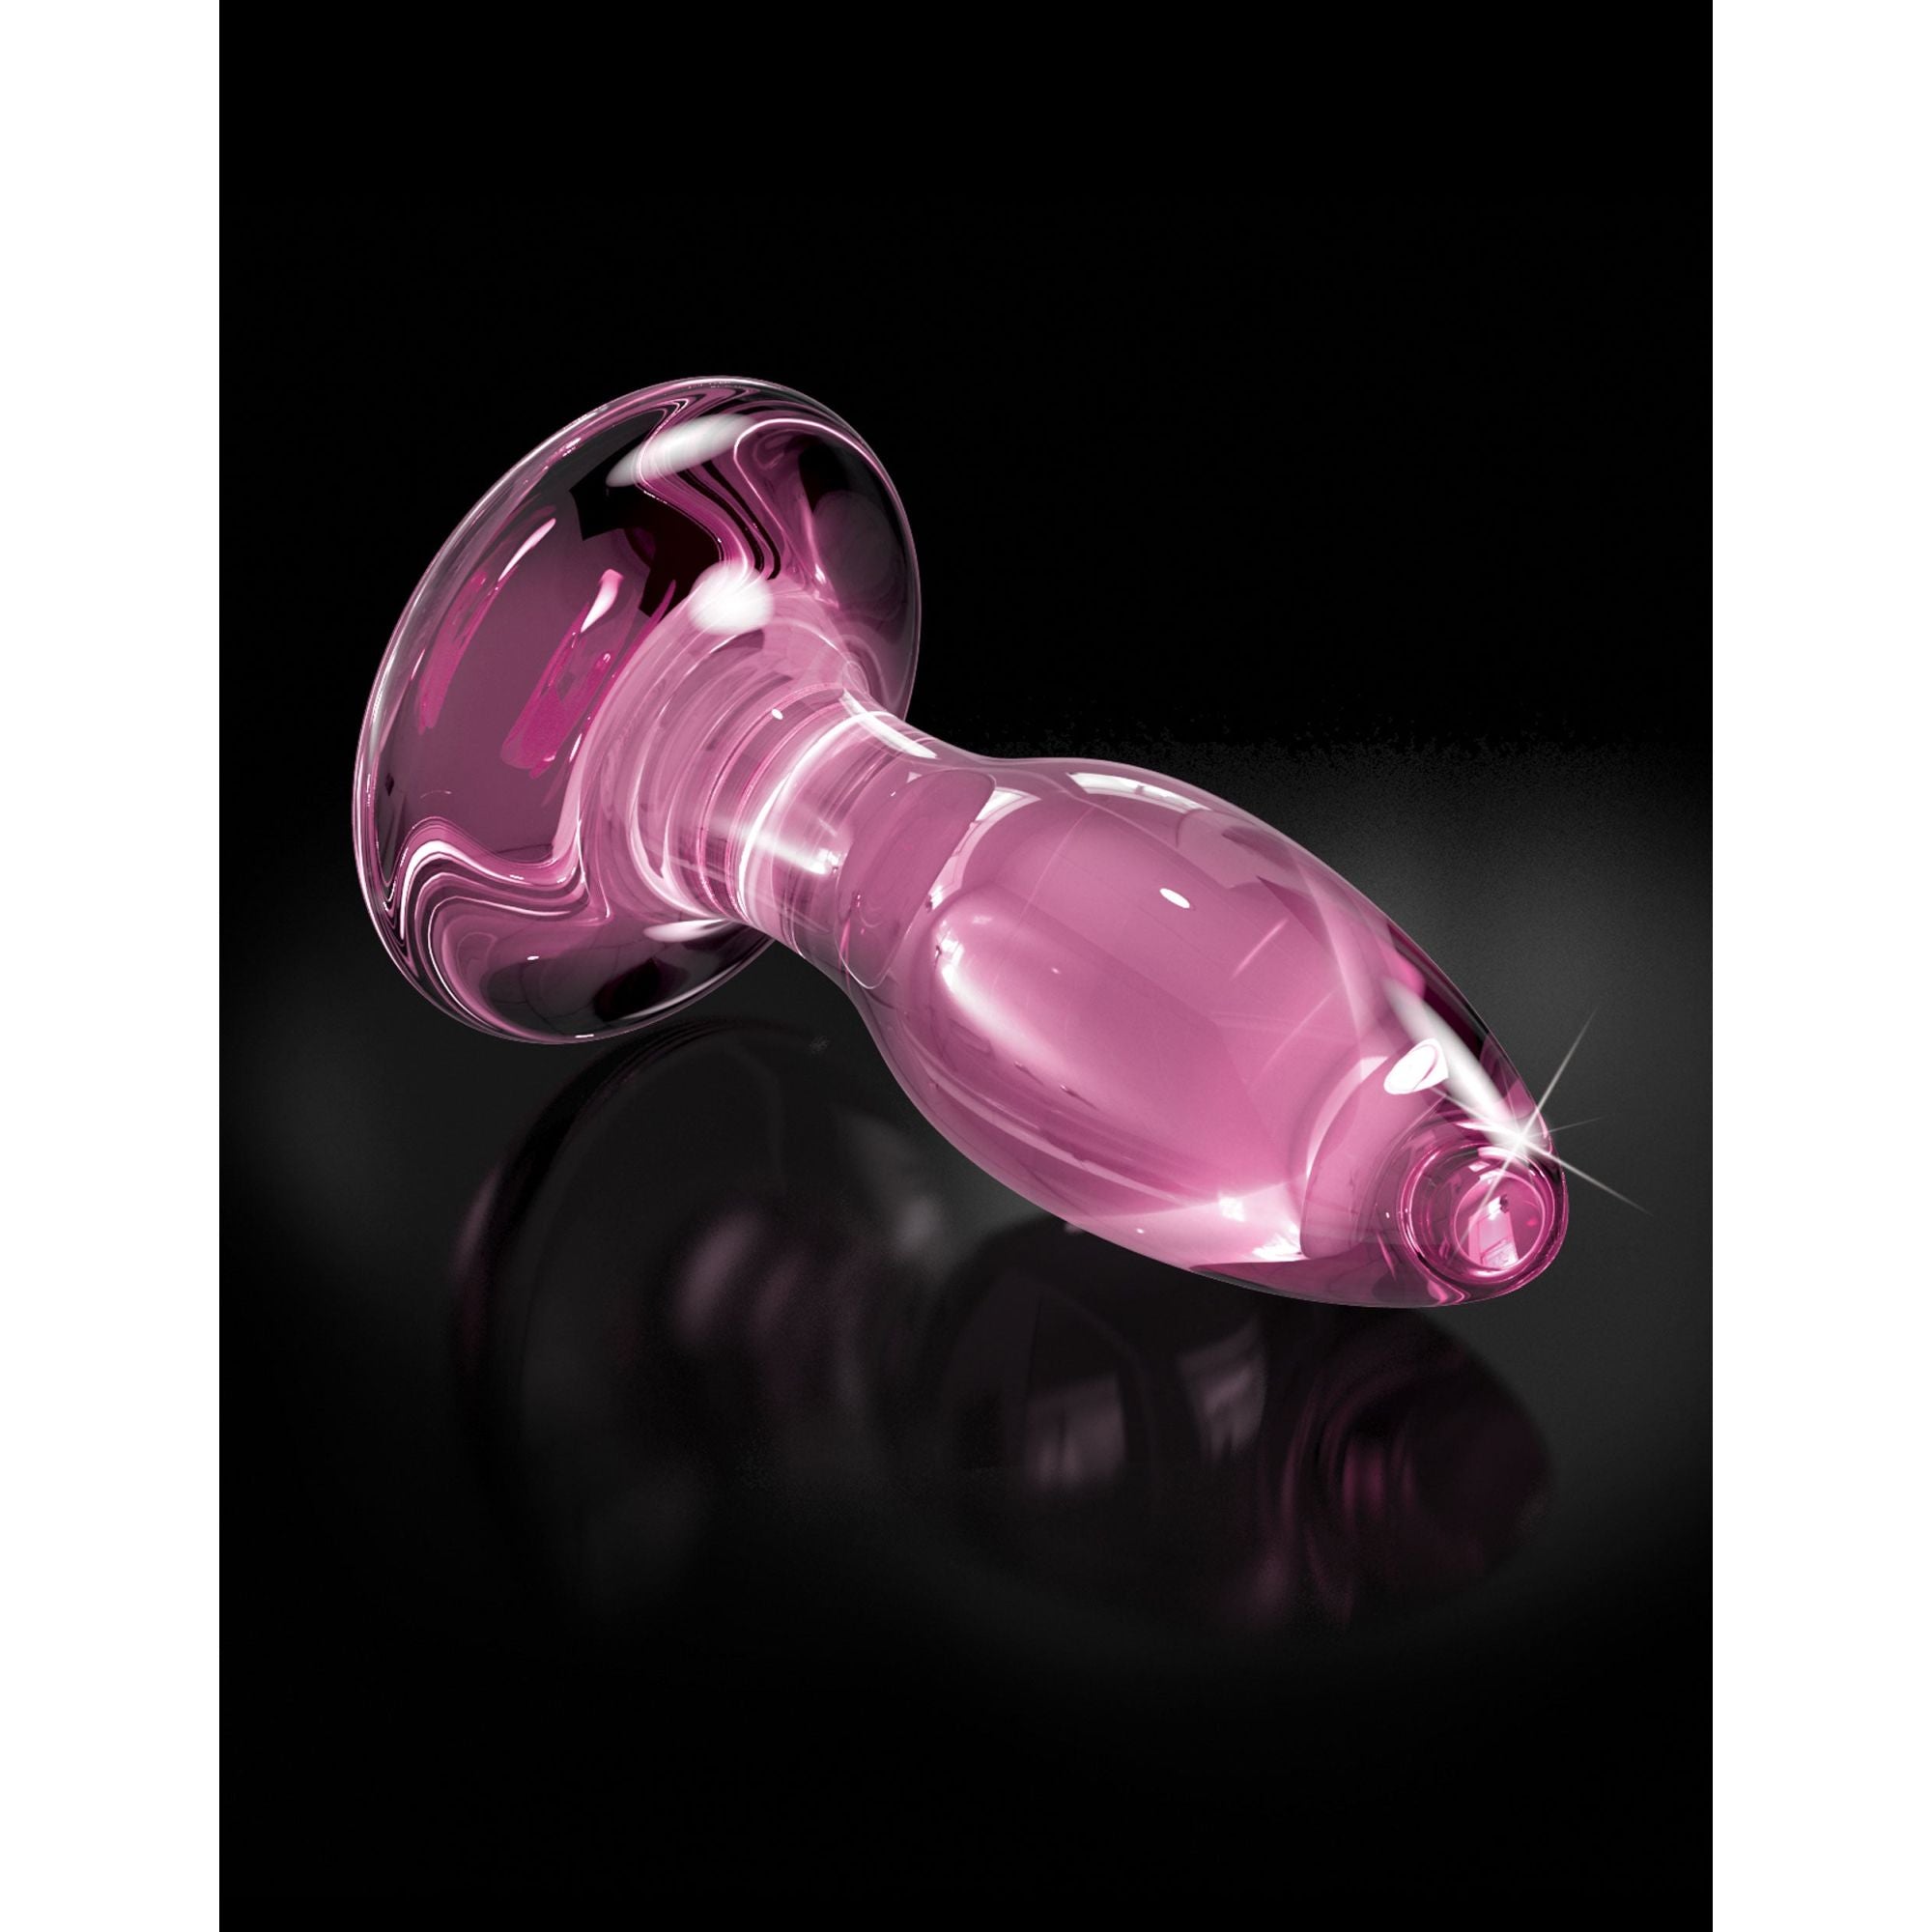 Icicles No 90 Pink Glass Butt Plug With Suction Cup